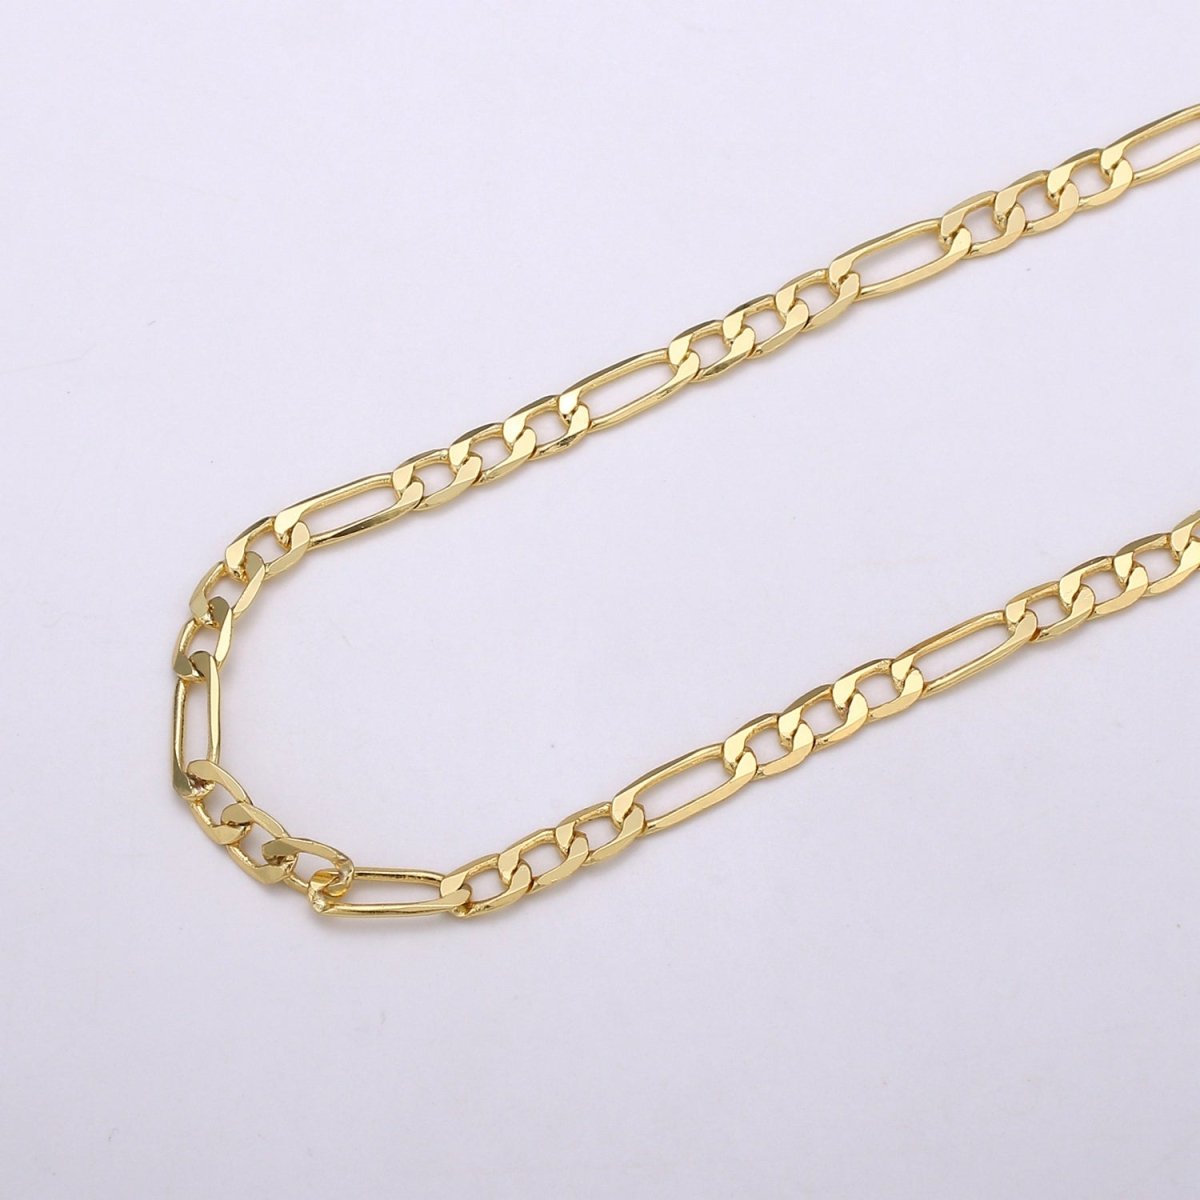 24K Gold Filled Figaro Chain By Yard, 3.8mm Wide Figaro Curb Linked Chain by Yard, Wholesale Roll Chain, For DIY Craft | ROLL-360 Clearance Pricing - DLUXCA